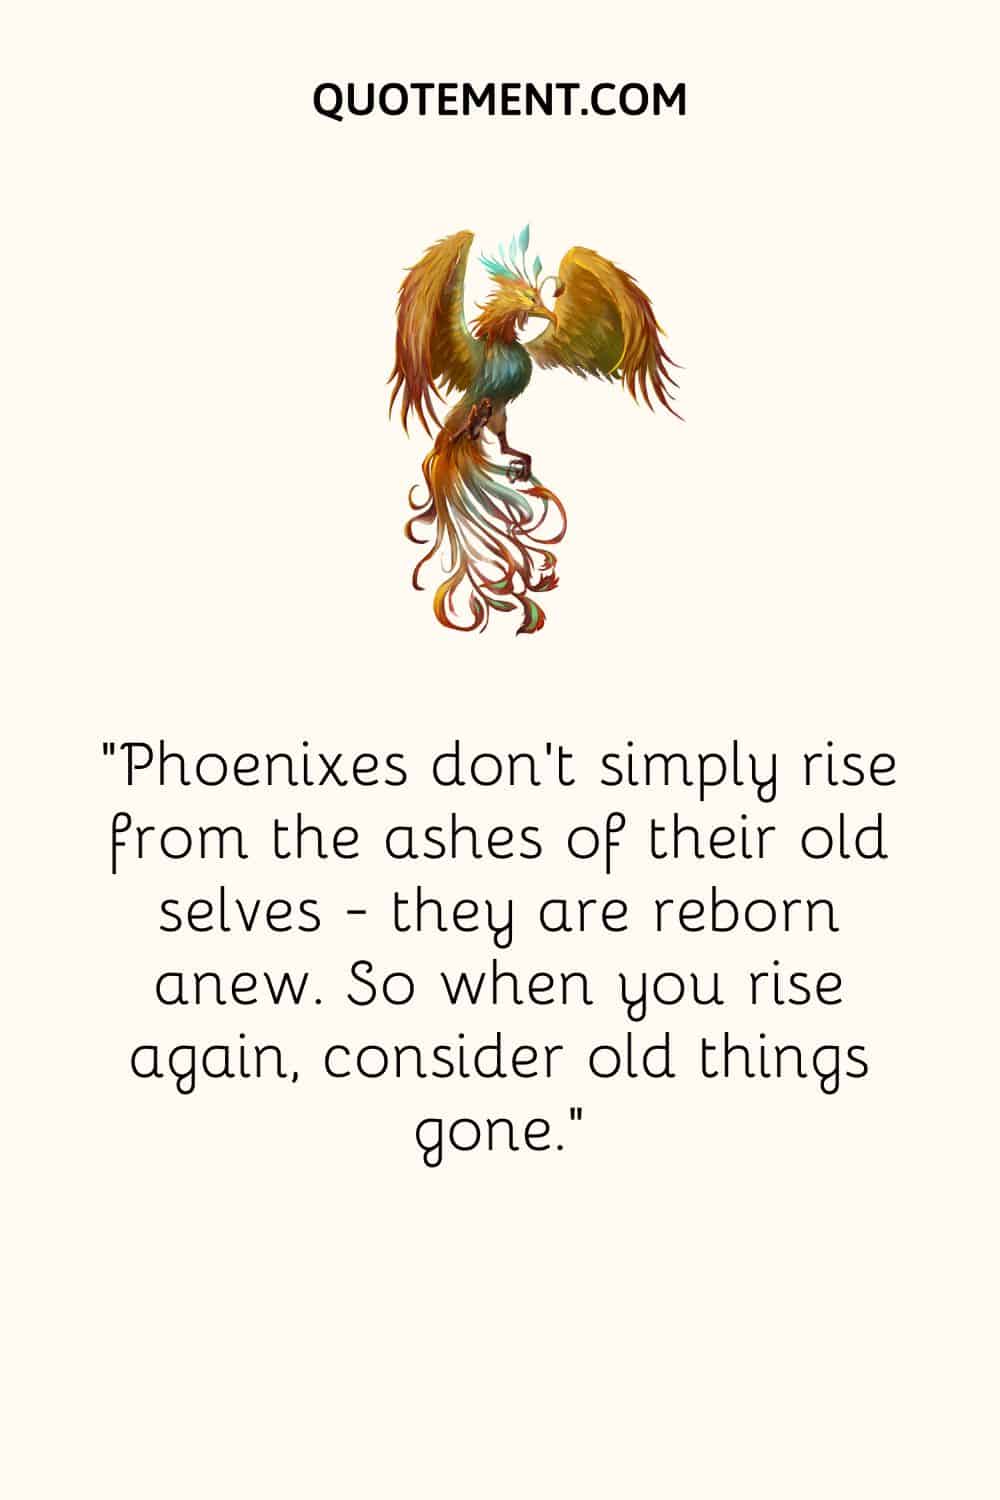 Phoenixes don’t simply rise from the ashes of their old selves